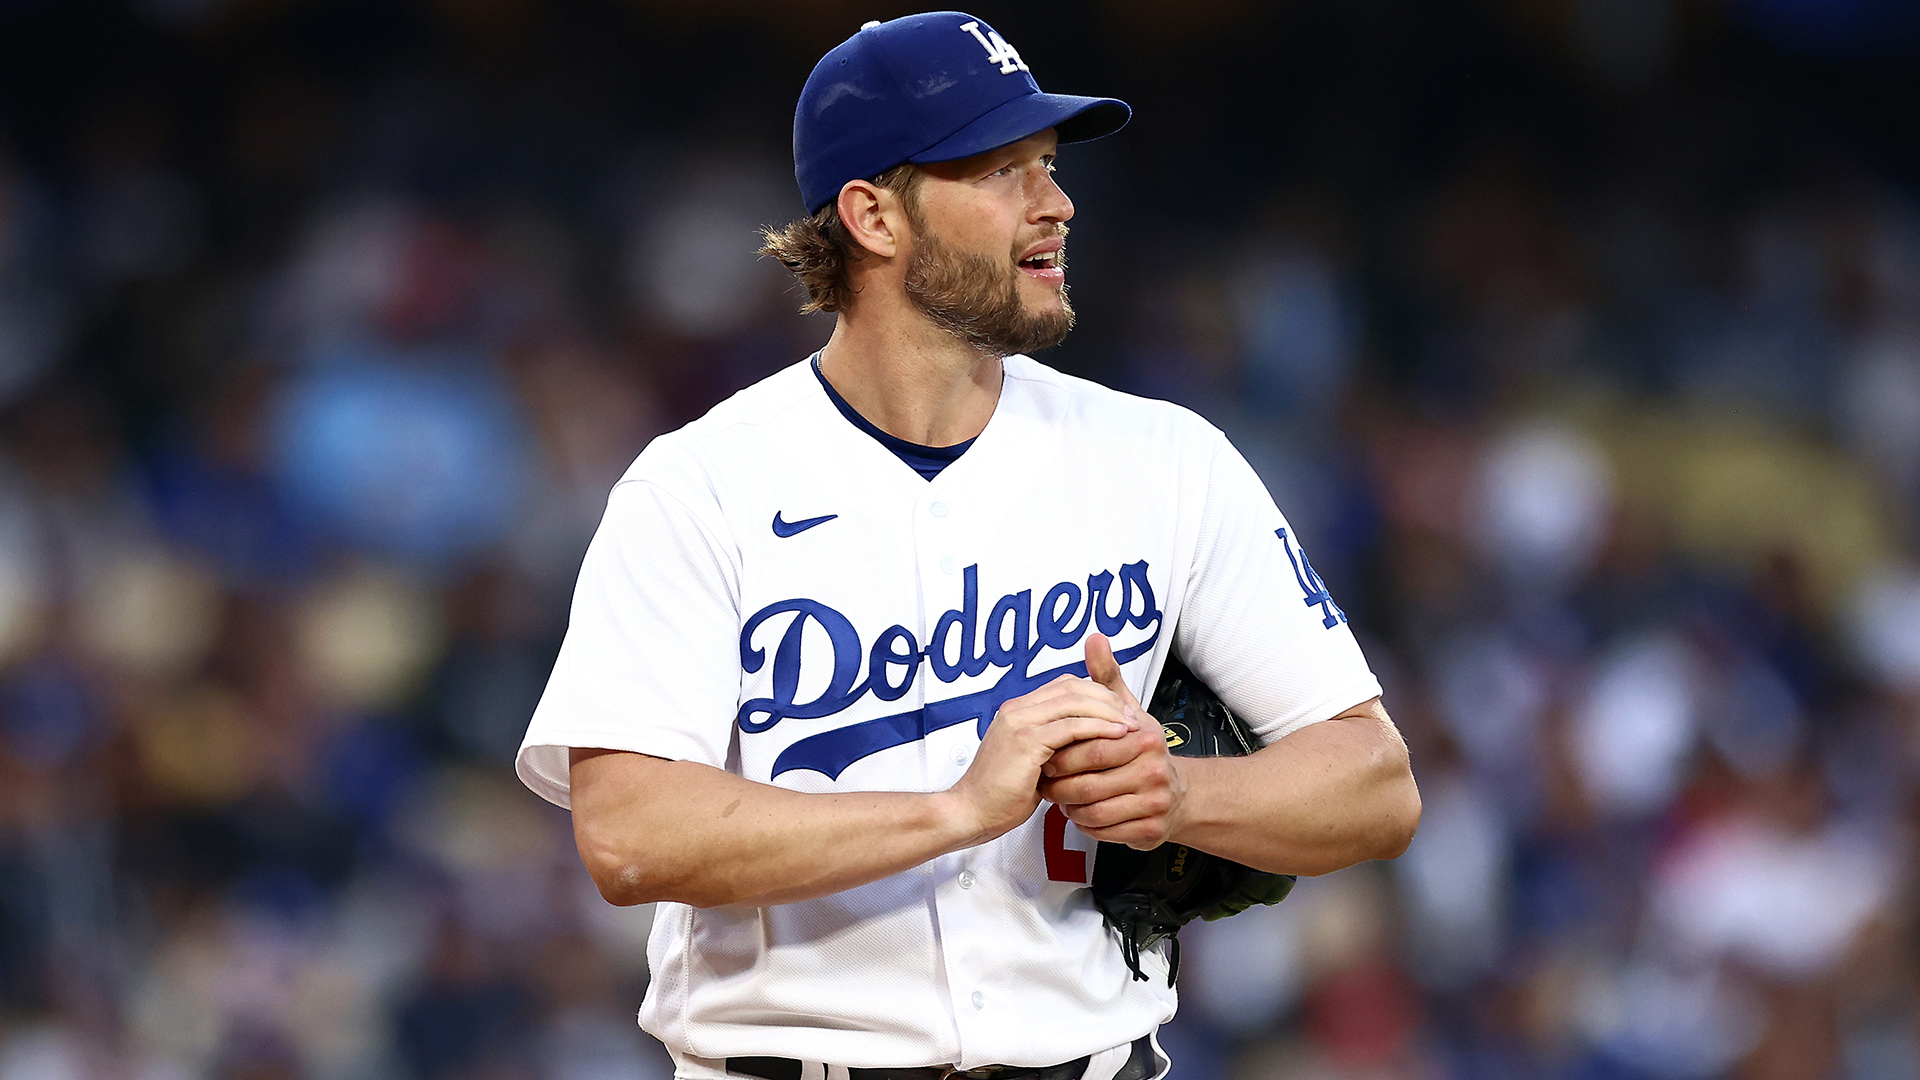 For Baseball Star Clayton Kershaw And His Wife, Faith Provides A Foundation